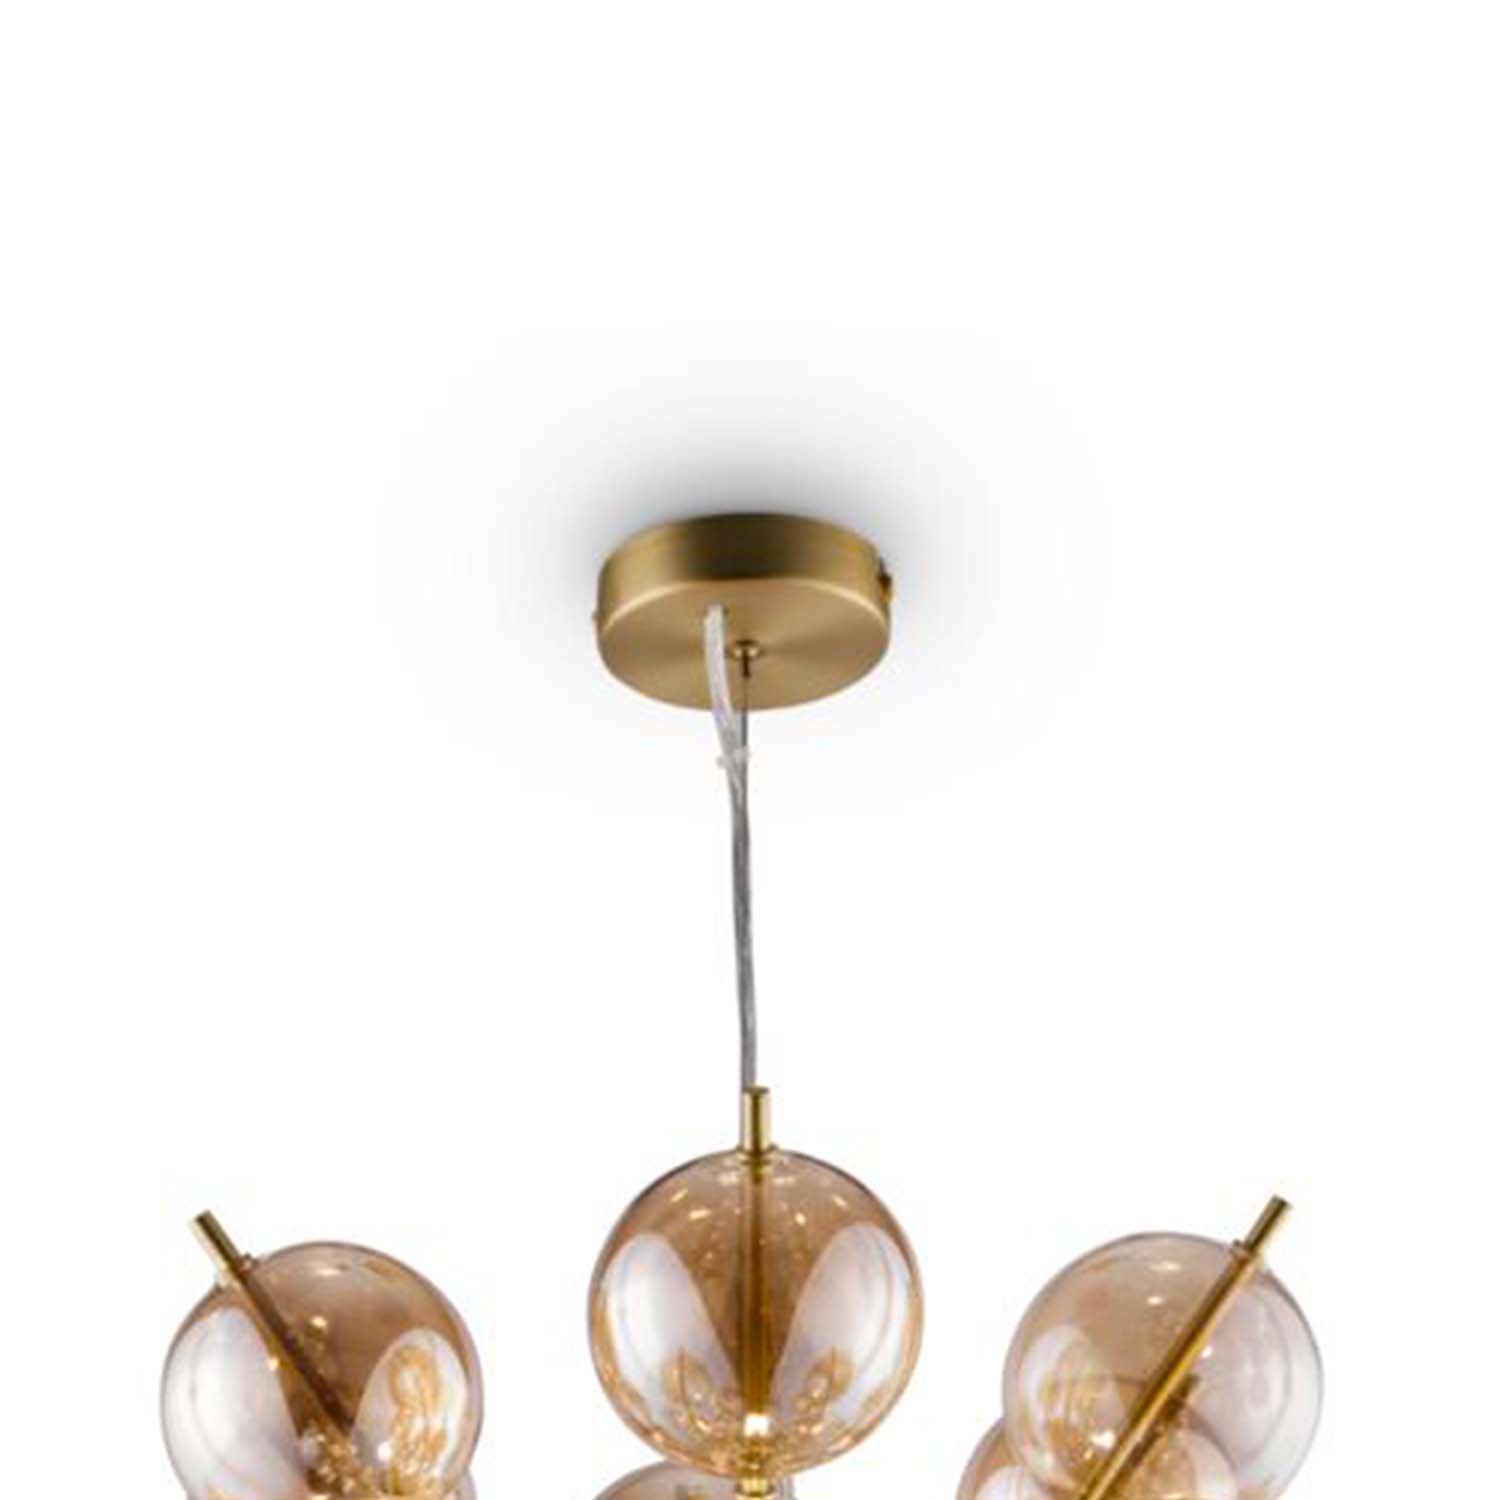 BOLLA - Chandelier with amber glass balls for living room